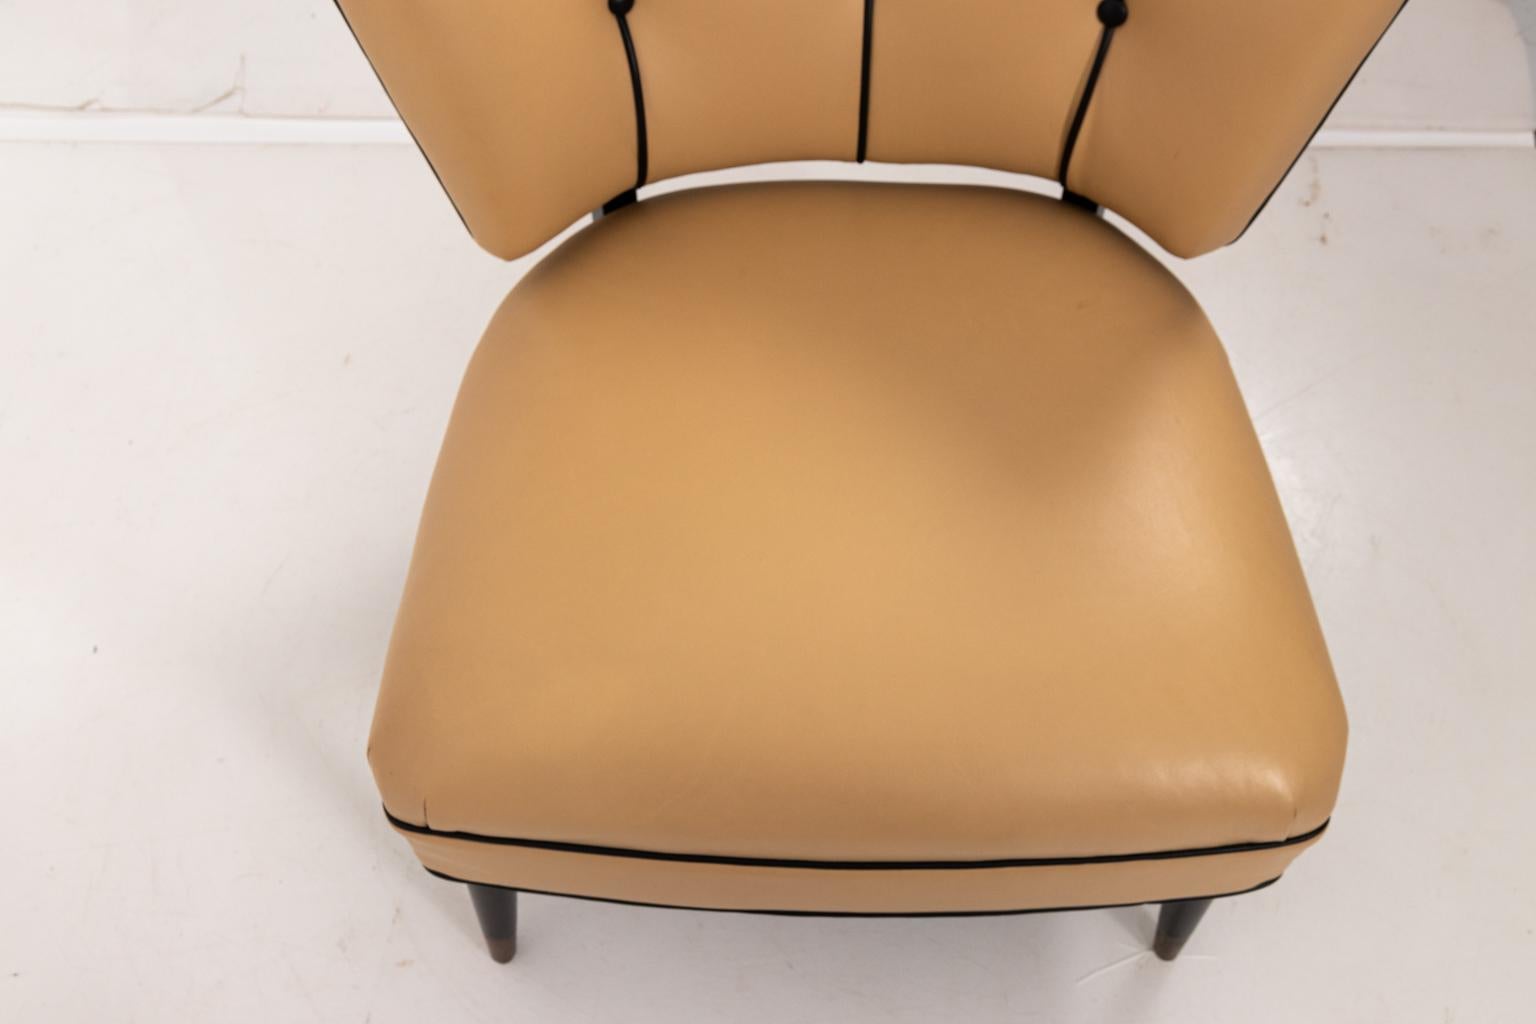 Hostess side chair in the manner of Williams Haines, circa mid-20th century. The piece features Chamois color leather upholstery, black leather piping trim, and tufted buttons on the seat back. The legs are in ebonized wood with brass caps. Please